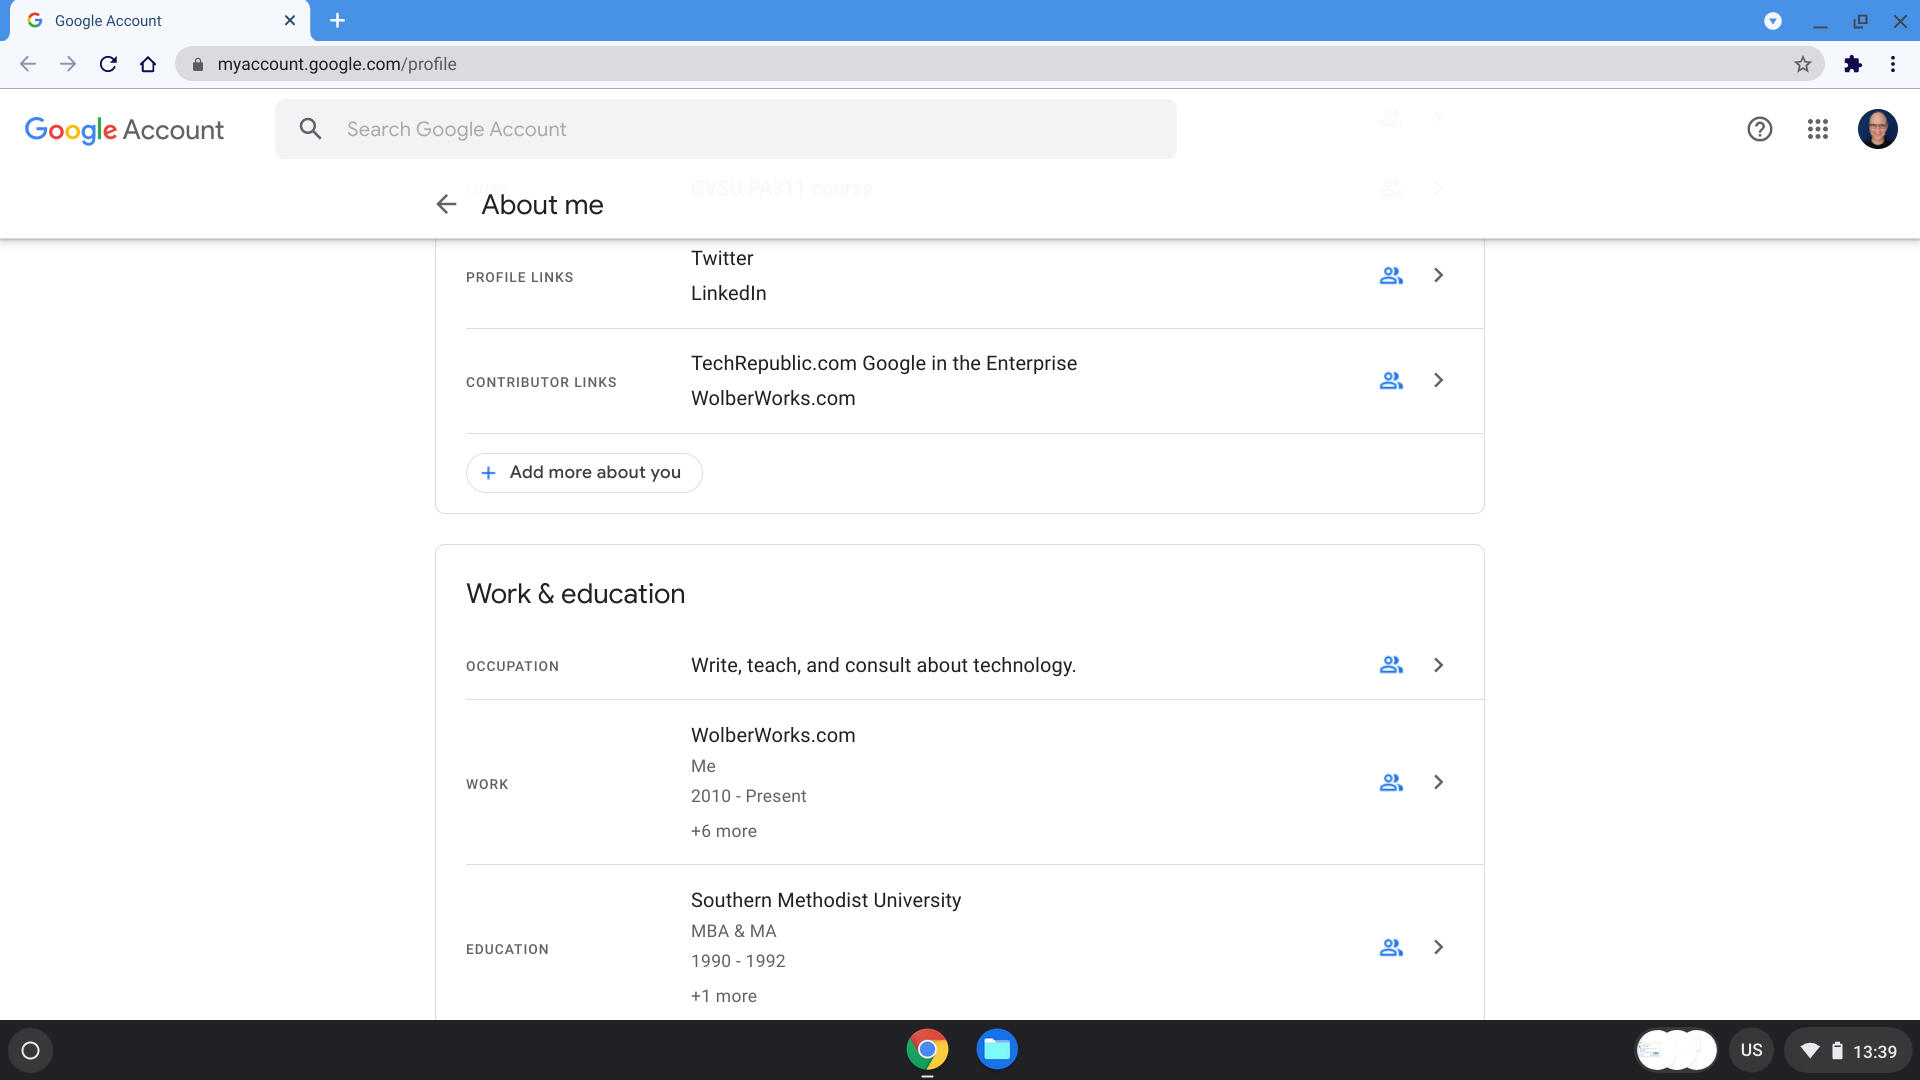 Screenshot of a portion of the author's Google profile page, with links to Twitter, LinkedIn, TechRepublic, and occupation, work, and education history displayed.